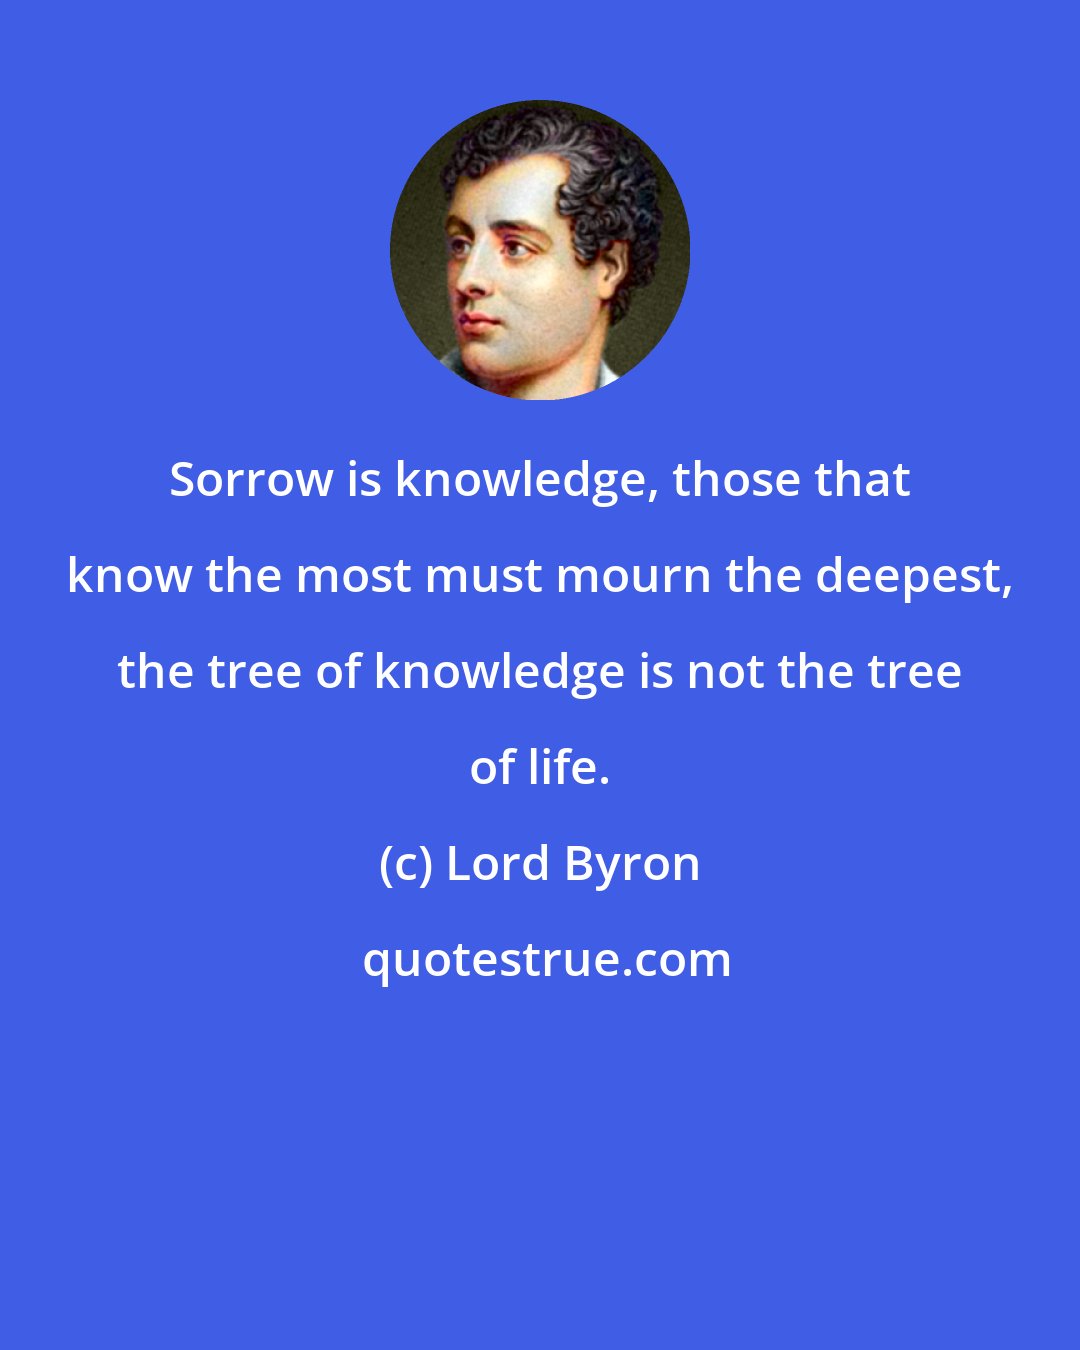 Lord Byron: Sorrow is knowledge, those that know the most must mourn the deepest, the tree of knowledge is not the tree of life.